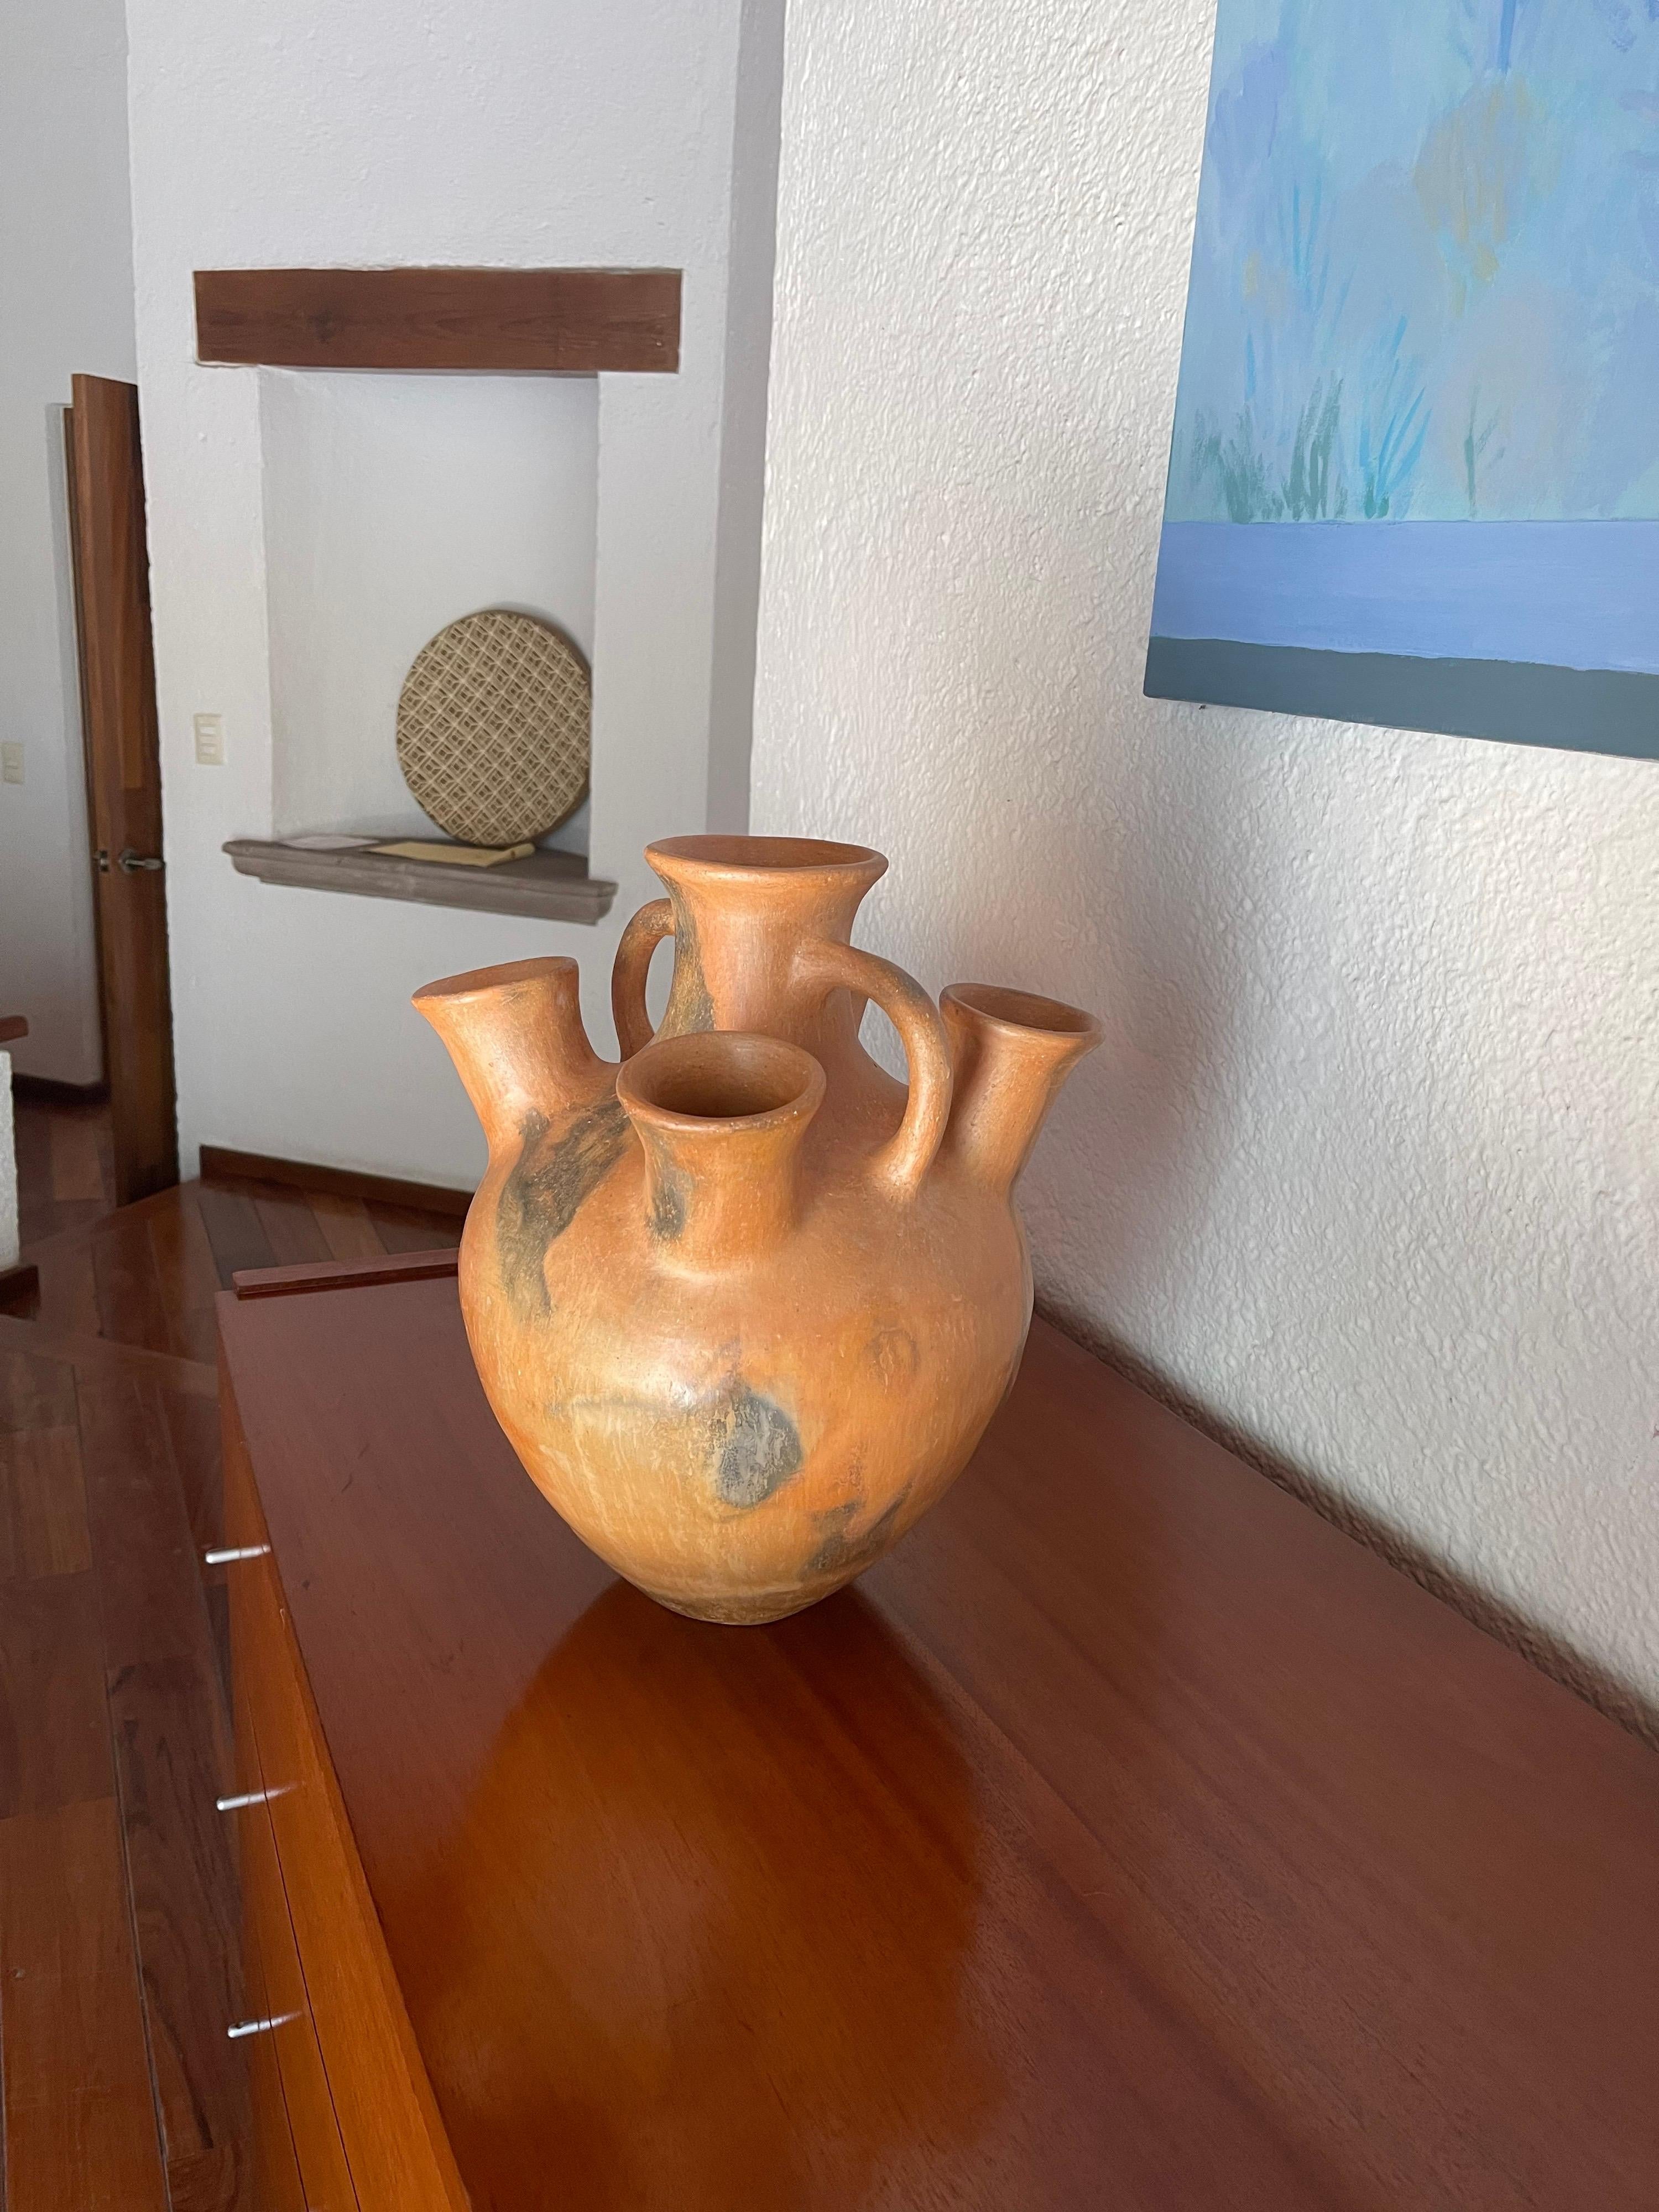 This rustic traditional pottery vase is the one of the most emblematic pieces from Silvia's work. Part of what makes her ceramic pieces so organic and natural is the process and native Oaxacan clay that Martinez uses to produce her pieces.  

In the